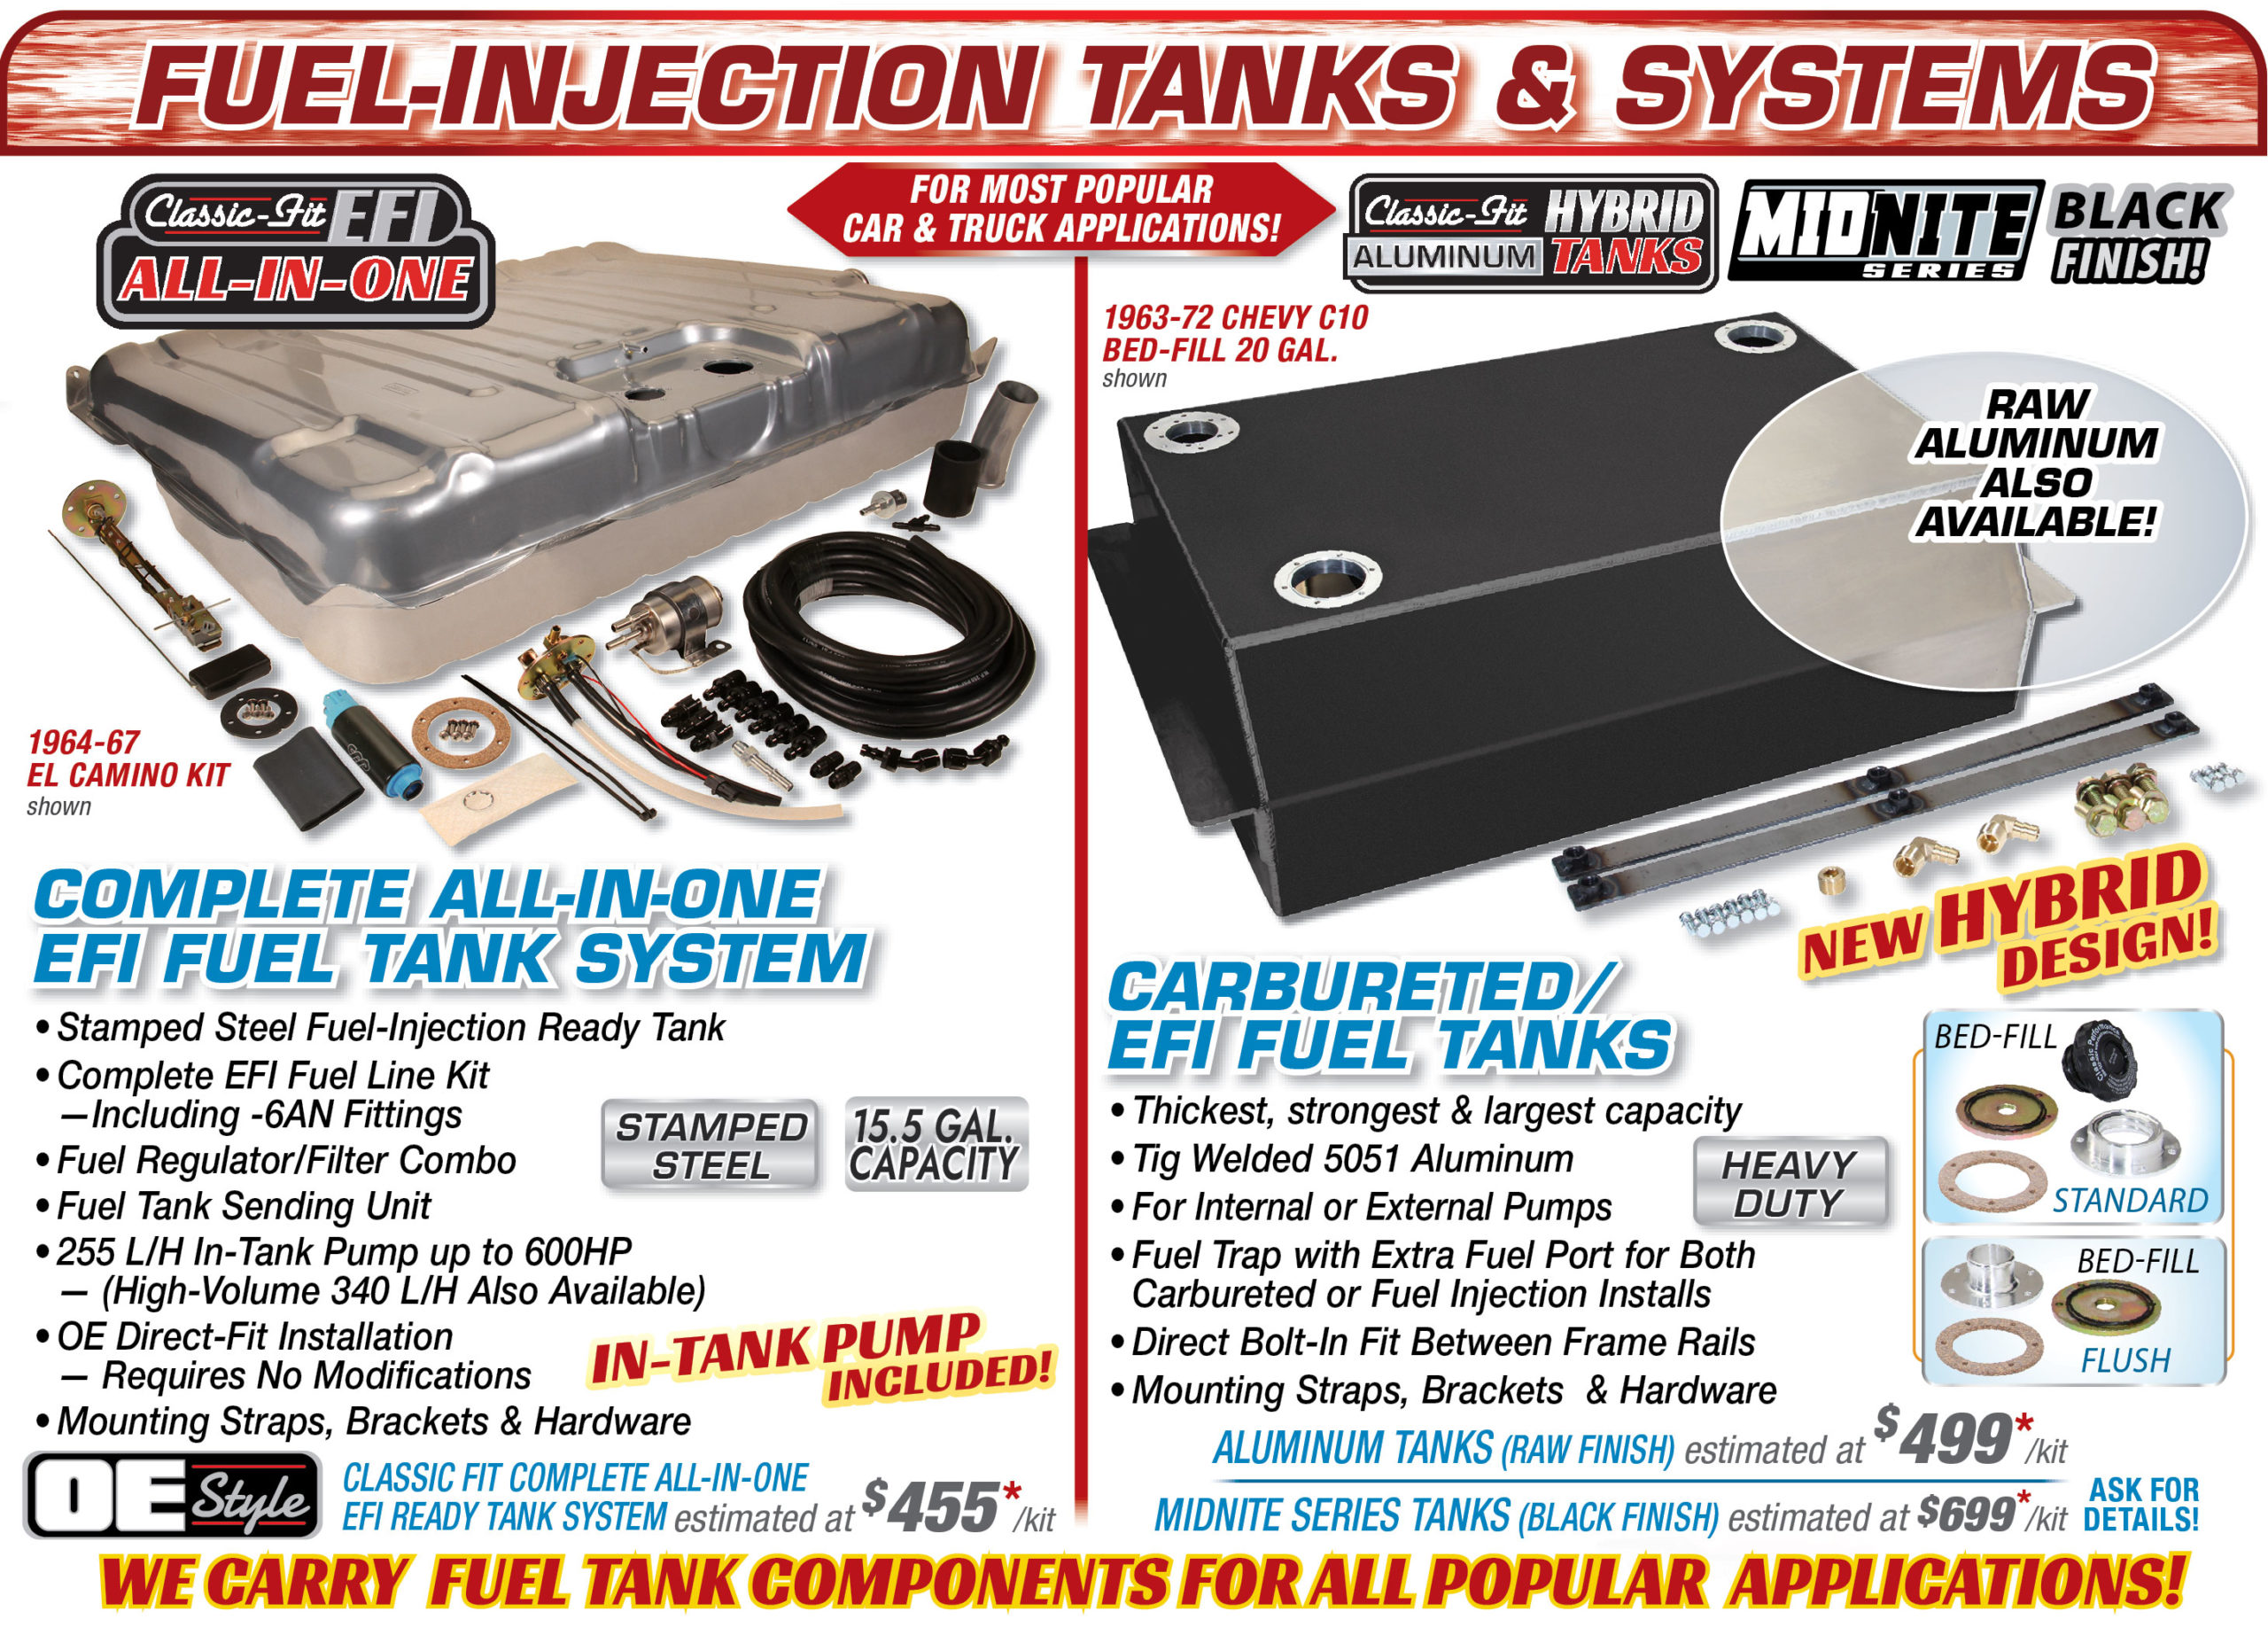 fuel-injection tanks and systems products